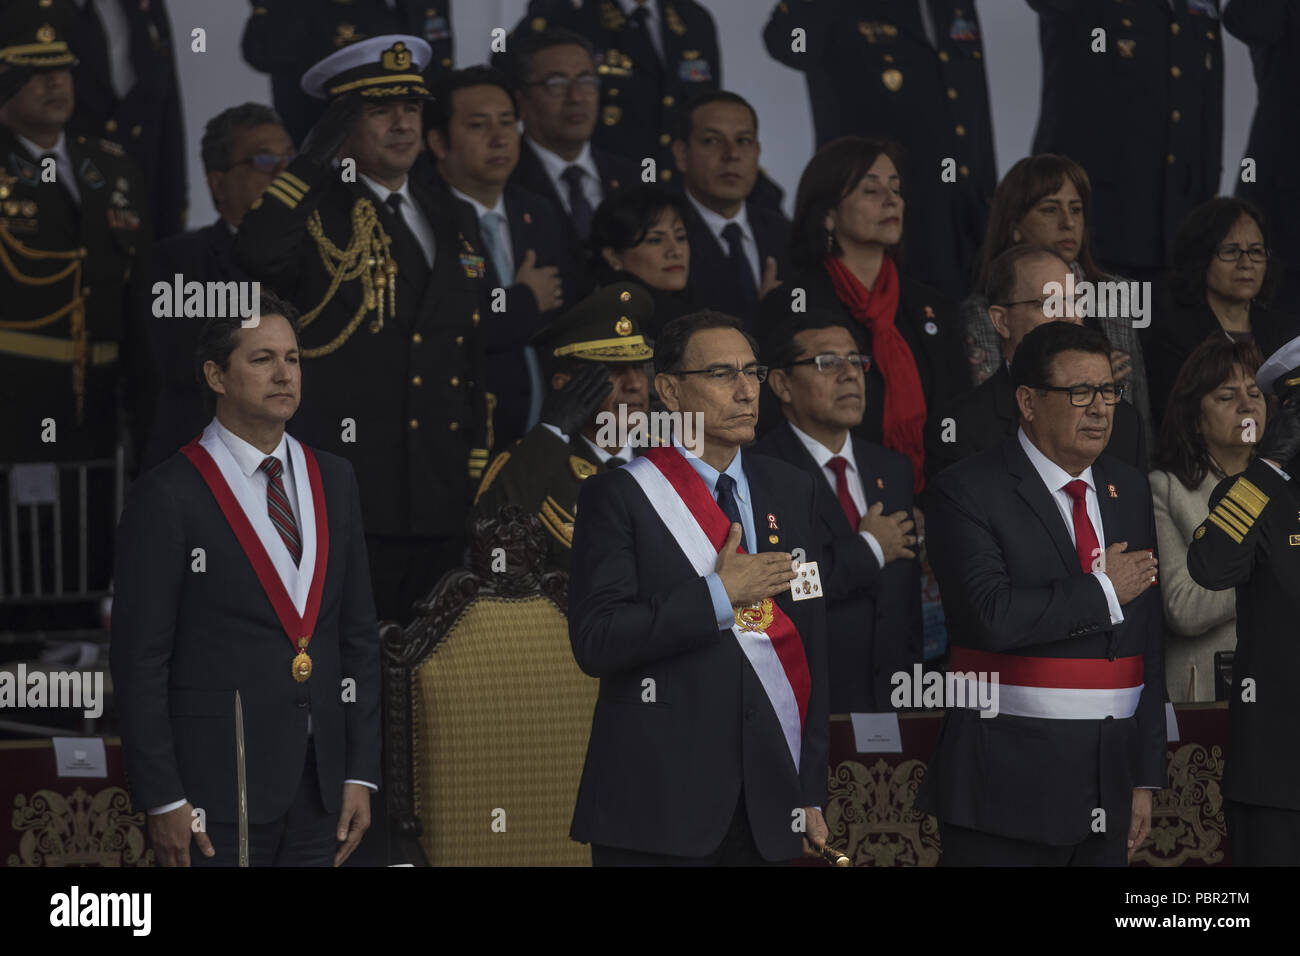 Lima, Lima, Peru. 29th July, 2018. Peru's President Martin Vizcarra seen at the military parade.Members of Peru's armed forces, coastguard, search & rescue, and police march in full uniform during the country's Gran Parada Militar. This parade always occurs the day after Peru's Independence Day marking the official end of festivities across the nation. Credit: Guillermo Gutierrez/SOPA Images/ZUMA Wire/Alamy Live News Stock Photo